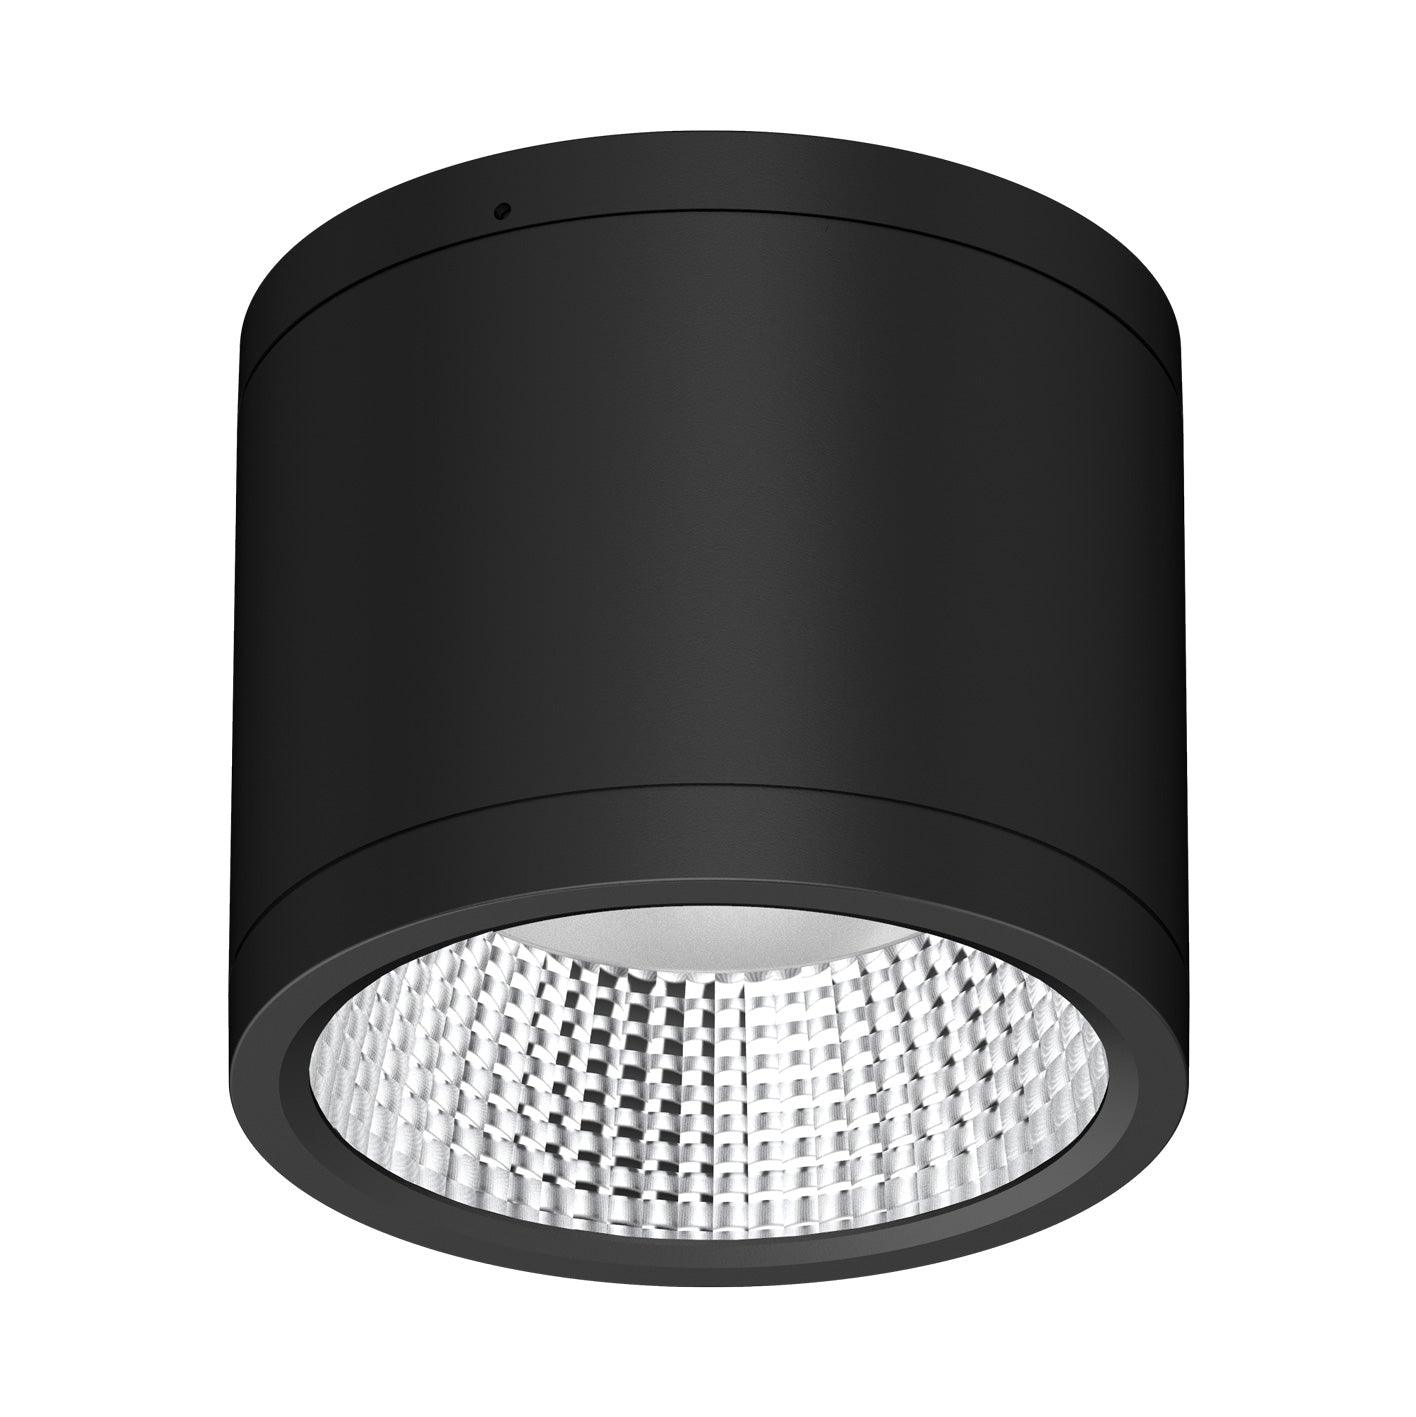 Domus Lighting LED Downlights 25W / BLACK Domus Neo-Pro Surface Mounted Downlight Lights-For-You 20892